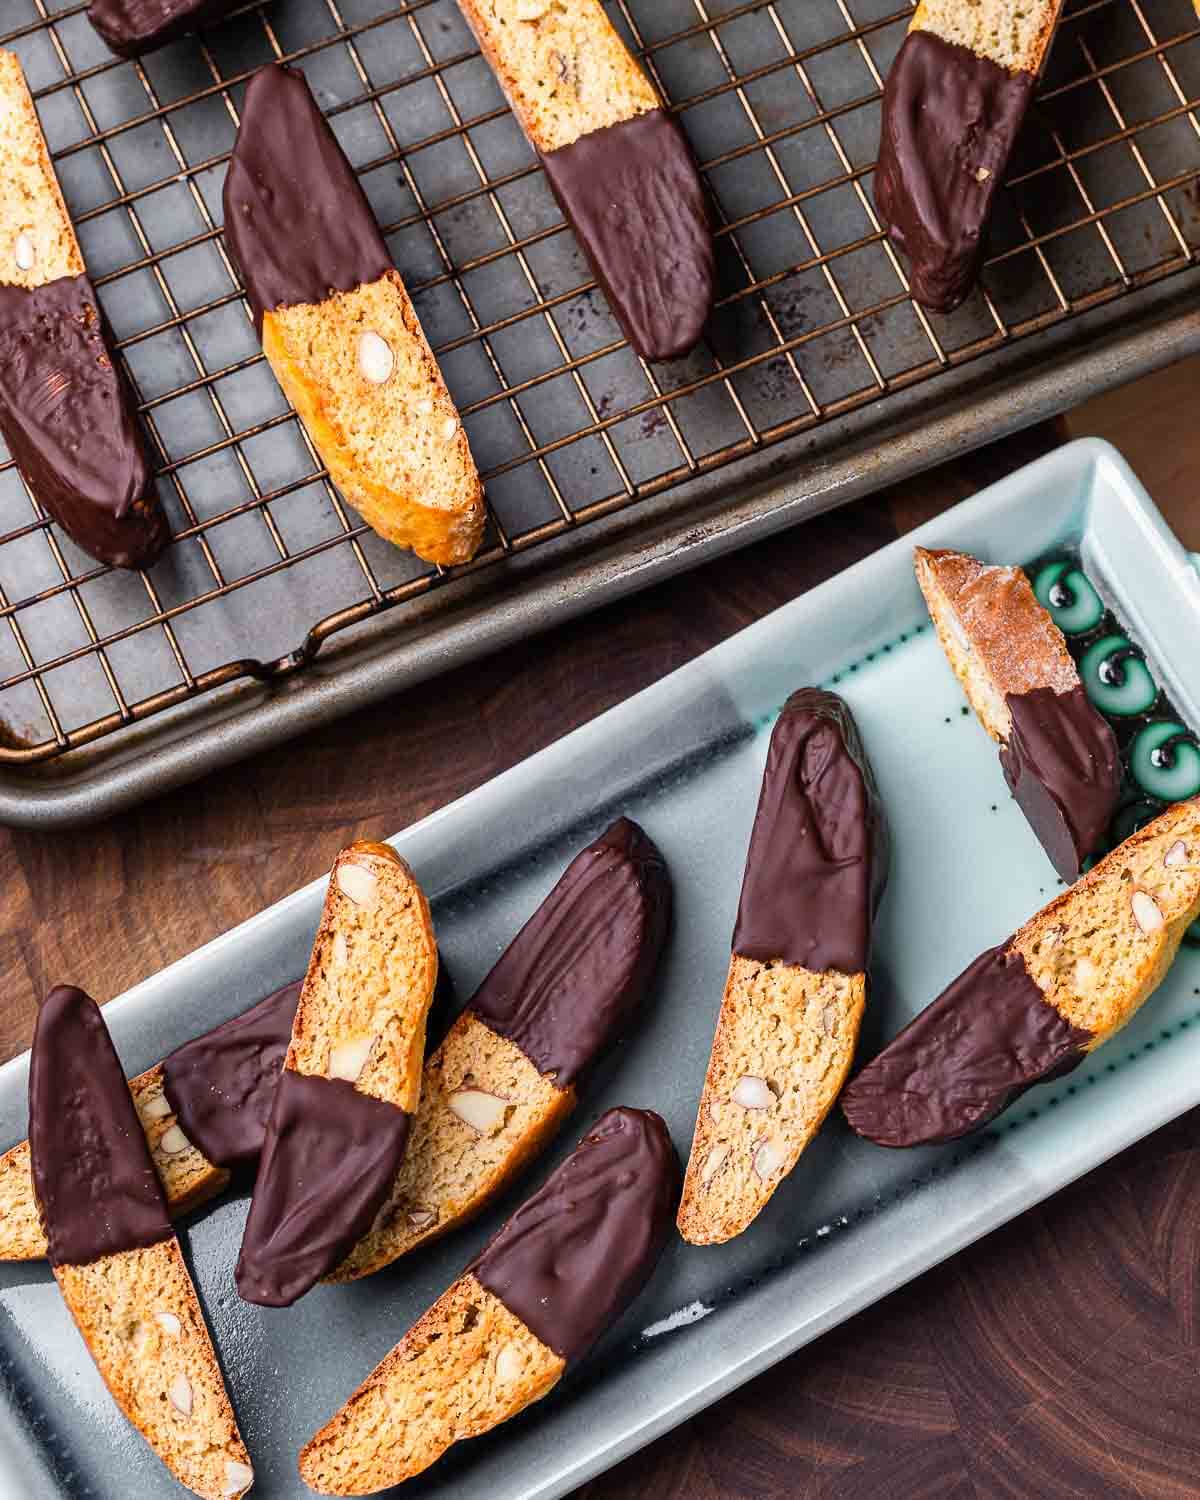 Almond biscotti dipped in chocolate on blue plate along with more biscotti on wire rack in the background.